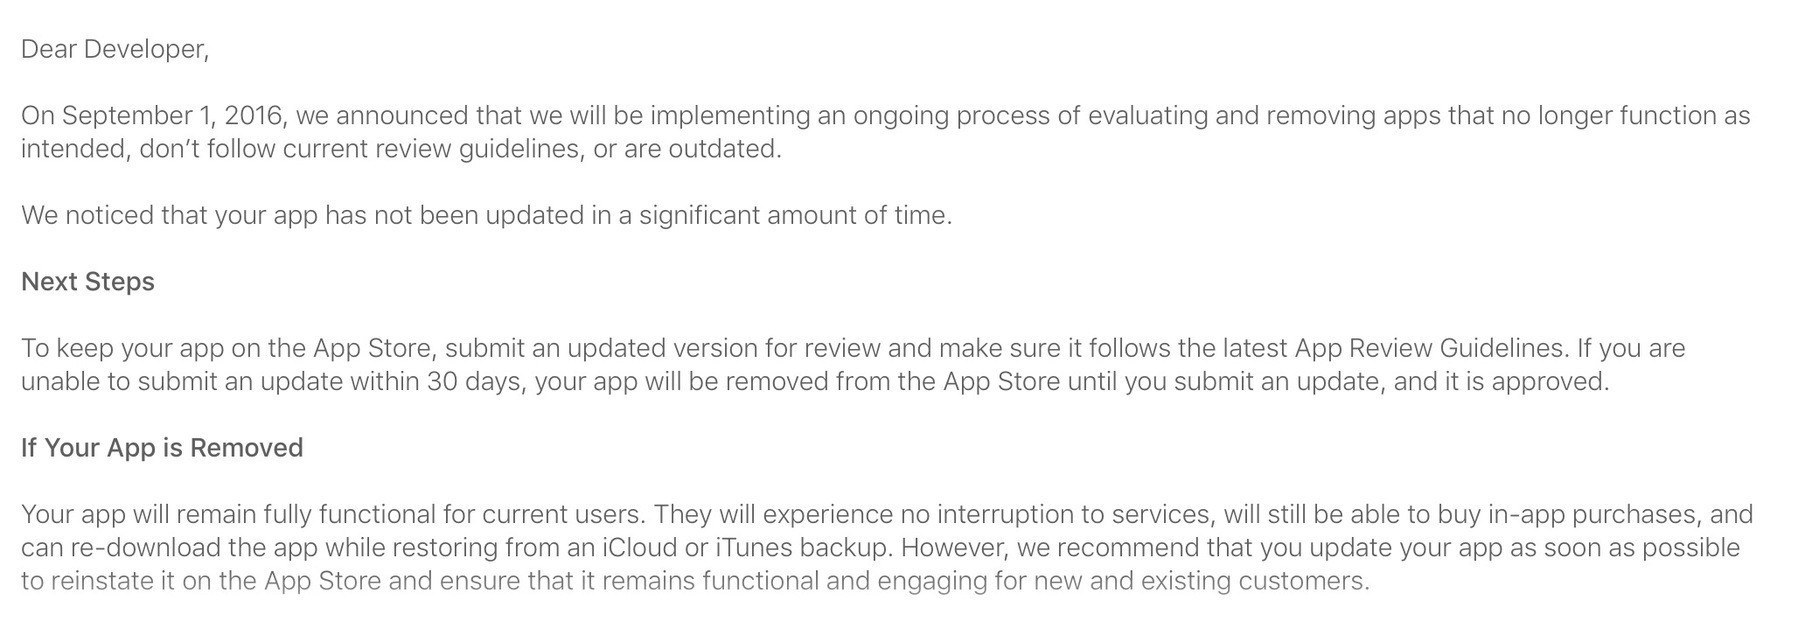 Screenshot of notice from Apple that an iOS app must be updated within 30 days or face removal.